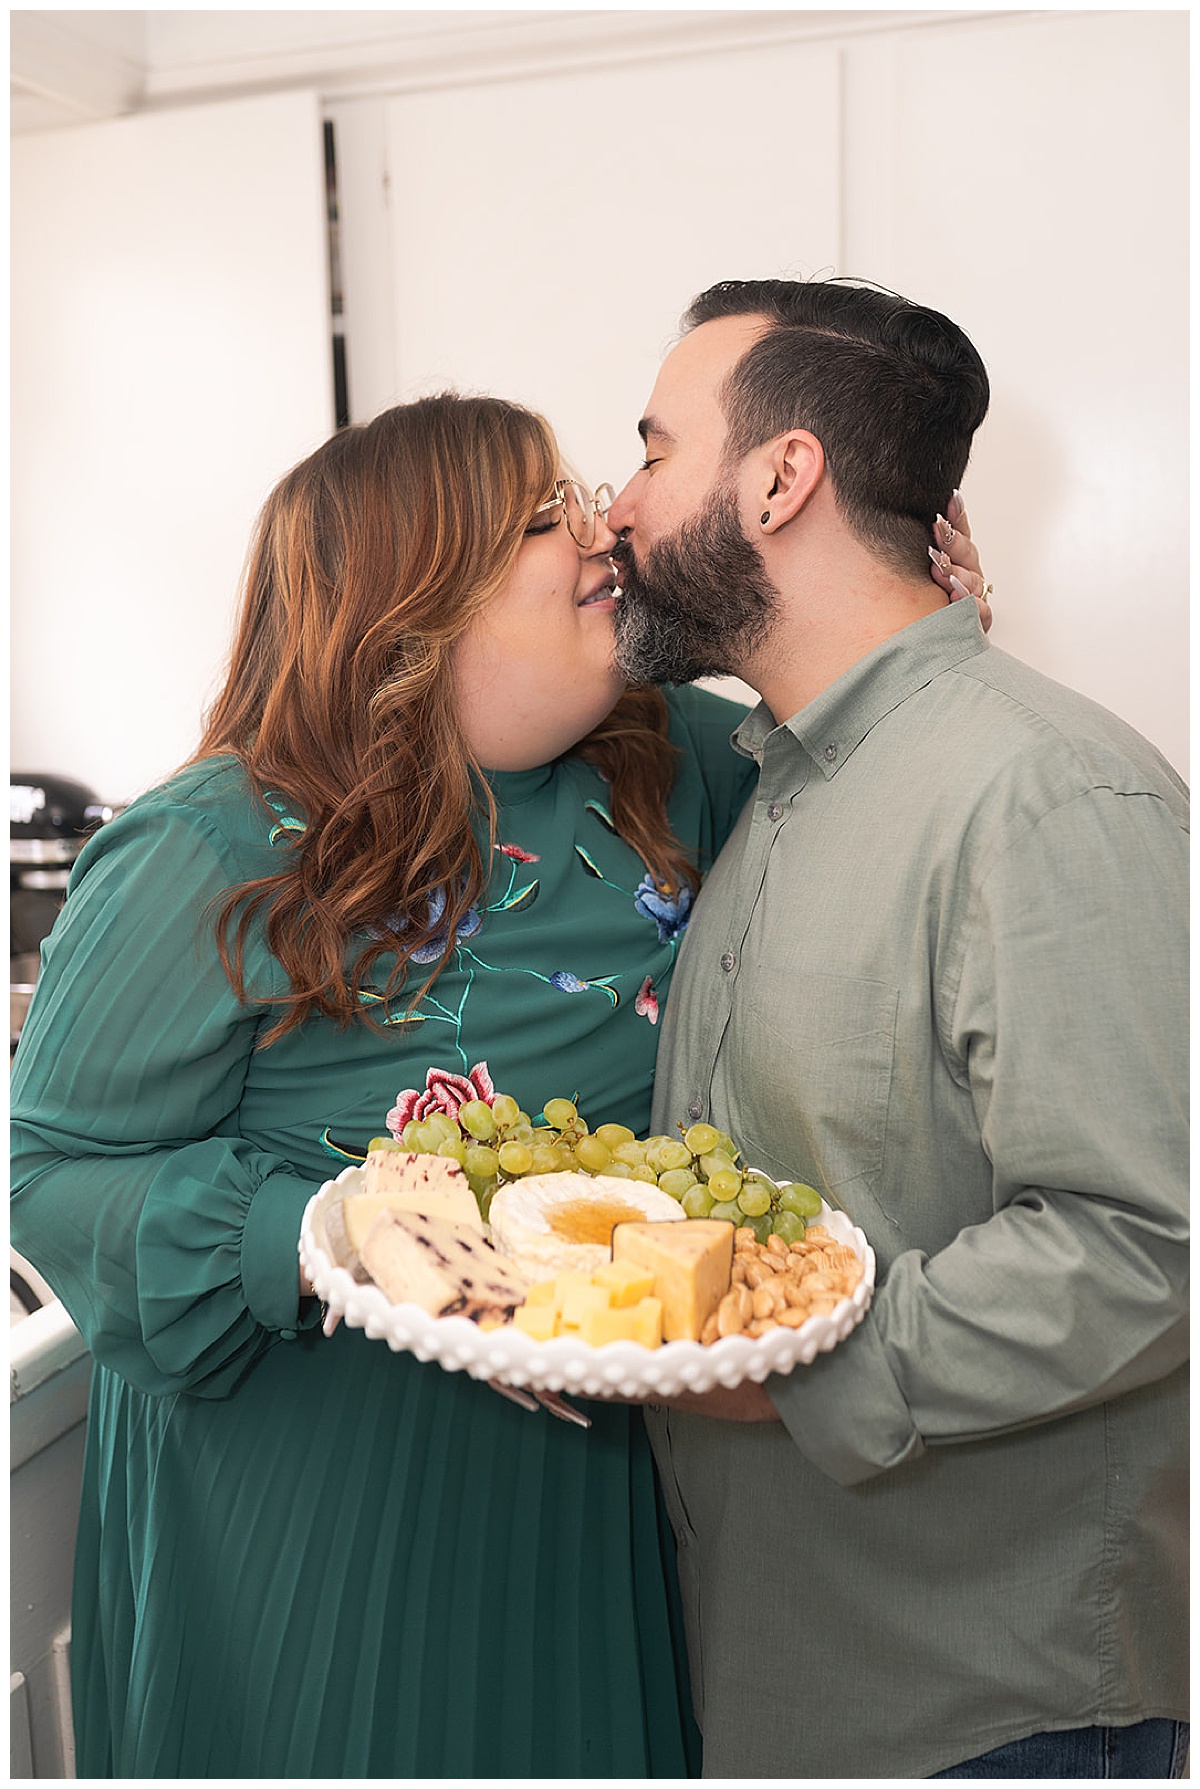 Two people kiss in kitchen for Swish & Click Photography